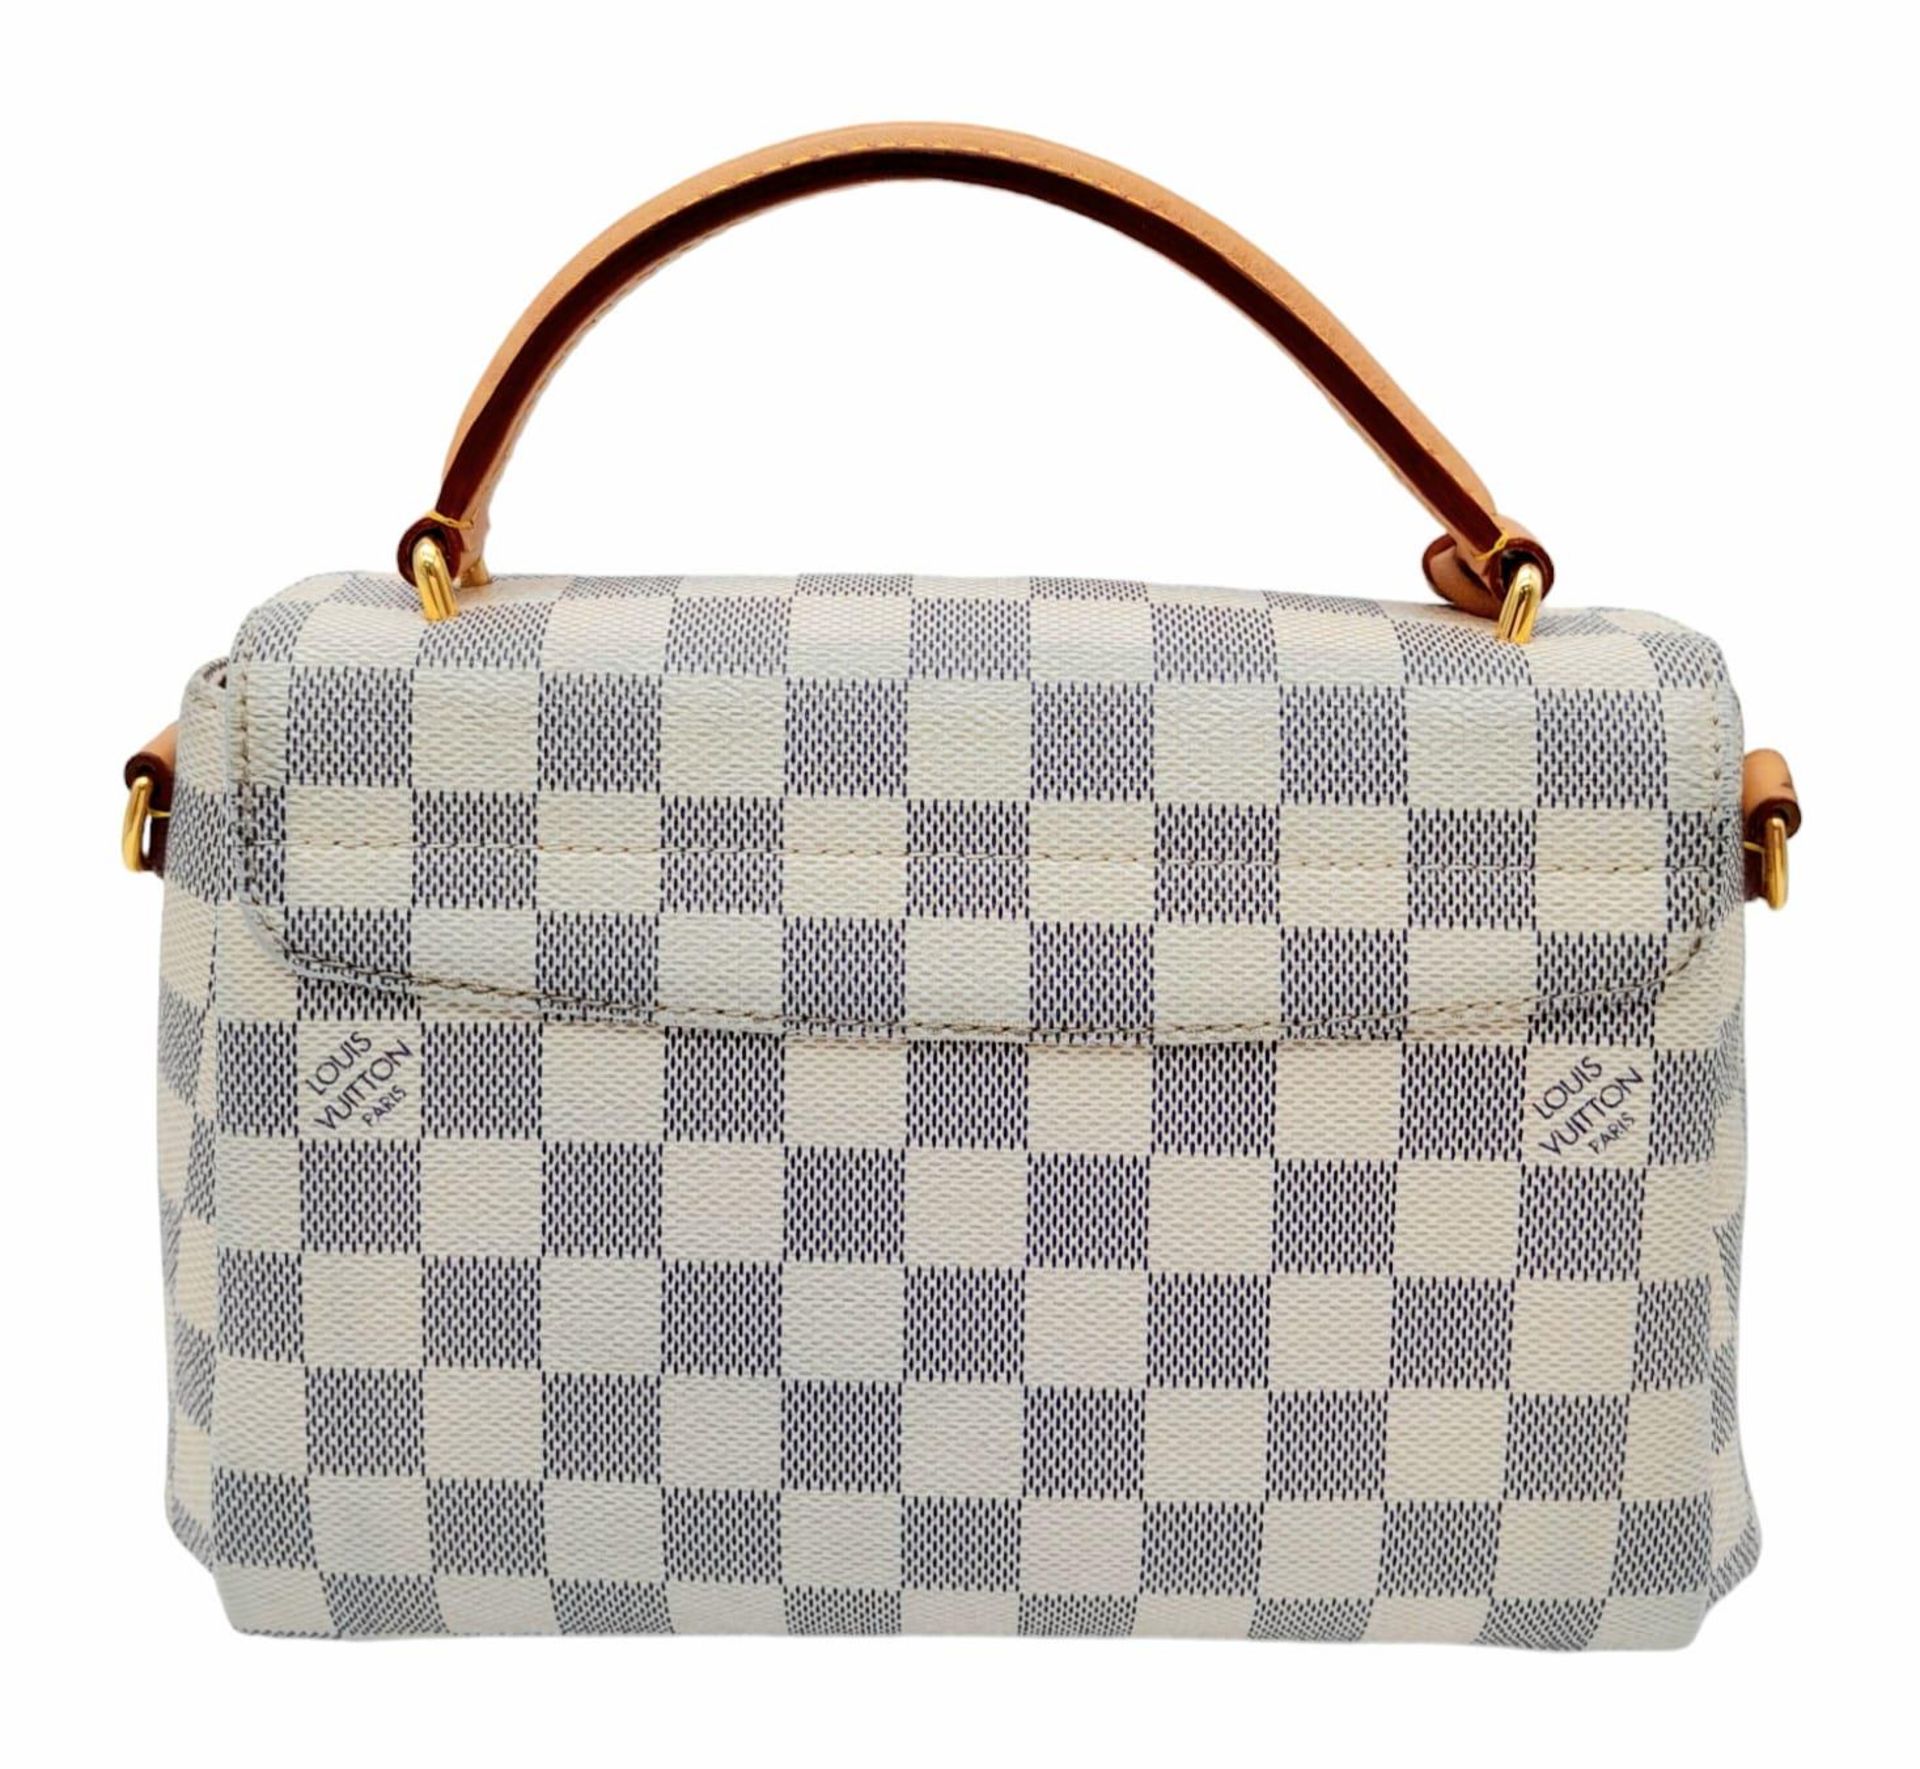 A Louis Vuitton damier canvas Croisette handbag in cream/blue, interior is baby pink. Leather handle - Image 5 of 12